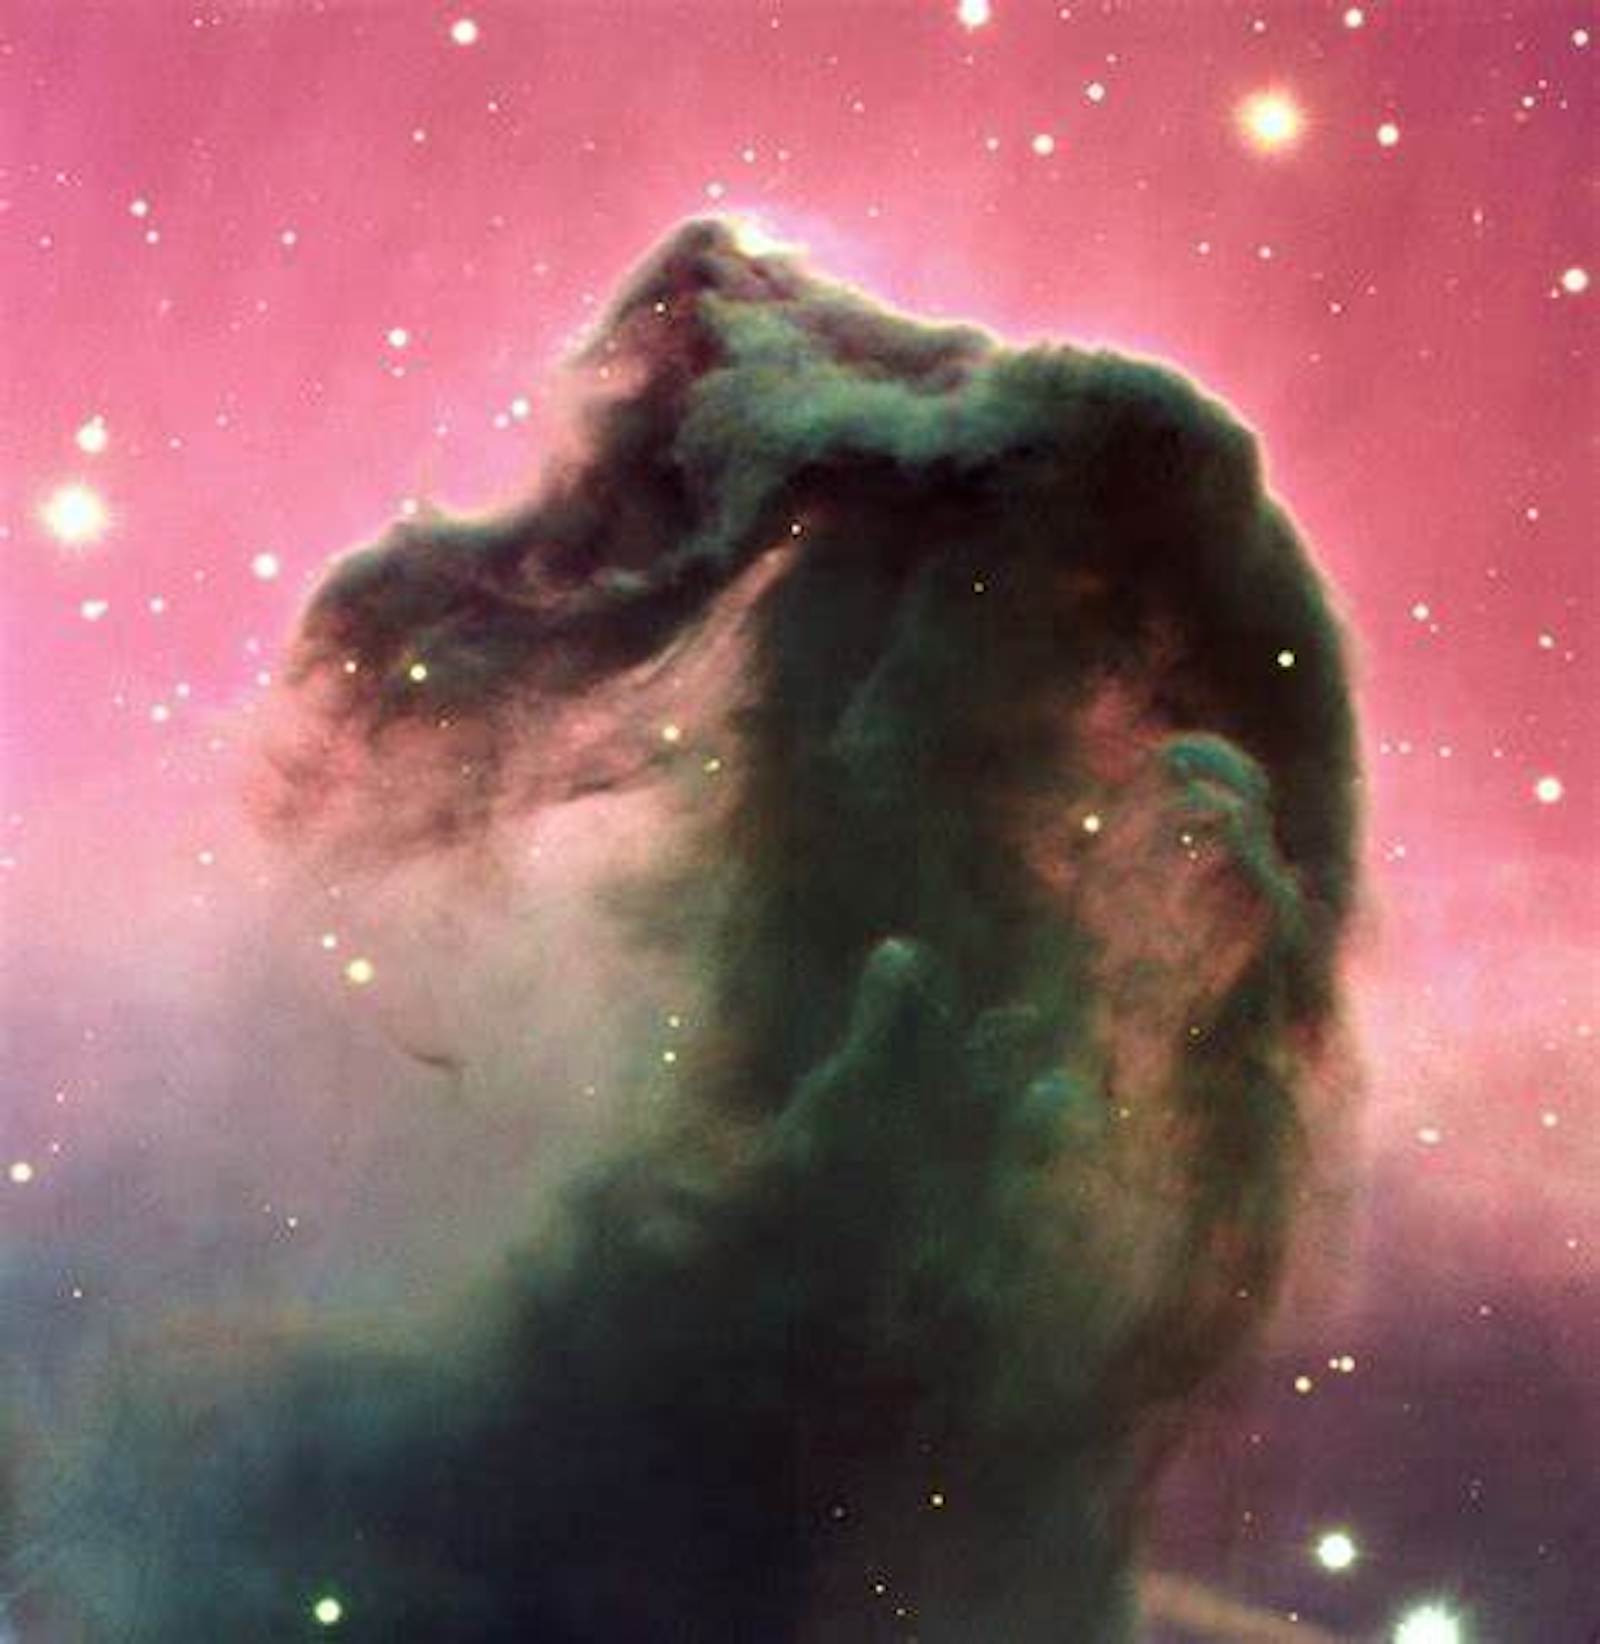 The Horsehead nebula in Orion, imaged in the visible part of the spectrum.